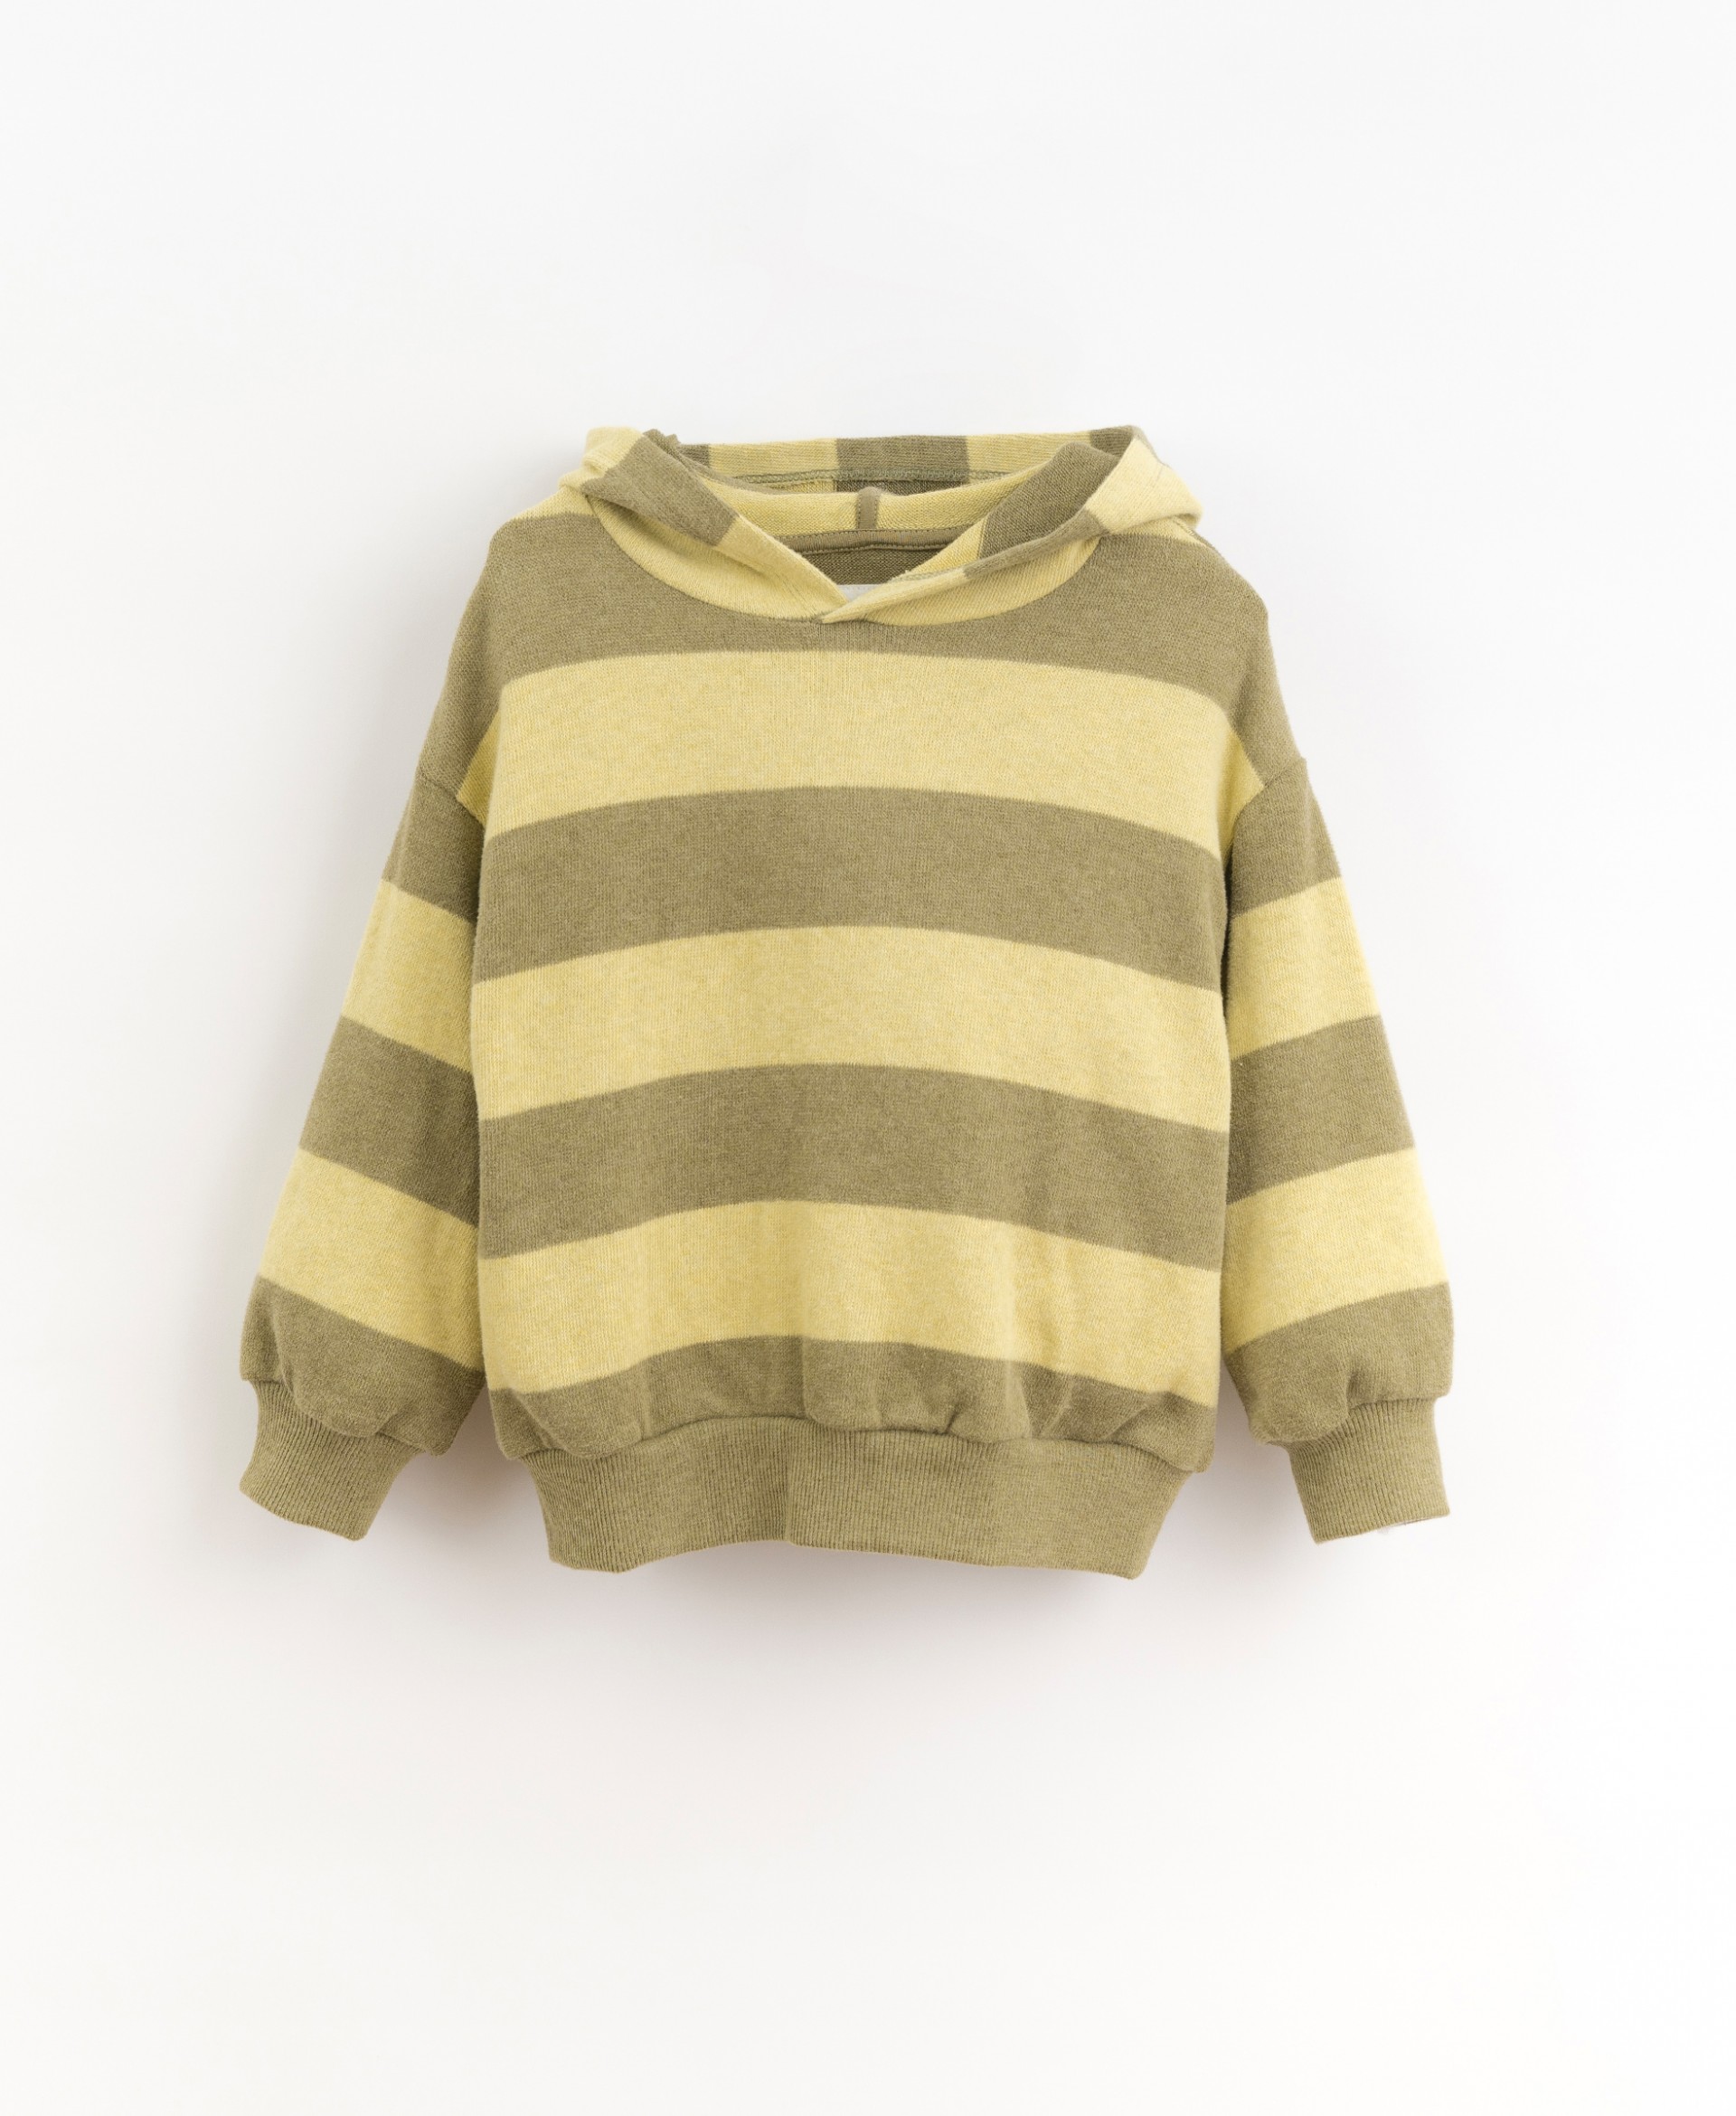 Striped jersey with elastic cuffs and waist | Organic Care